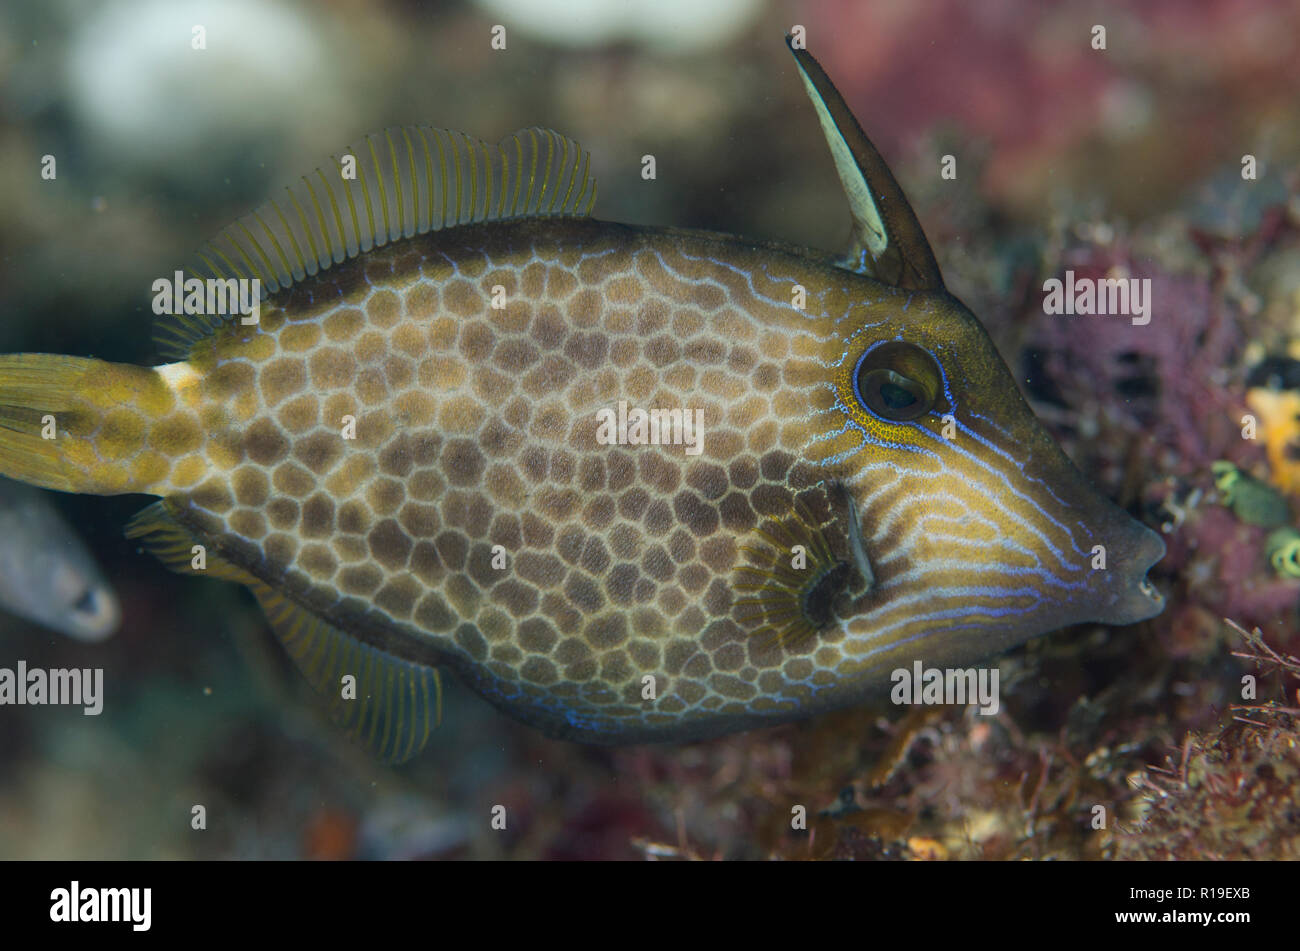 Wirenet Filefish, Cantherhines pardalis, with extended dorsal fin, Nudi Falls dive site, Lembeh Straits, Sulawesi, Indonesia Stock Photo